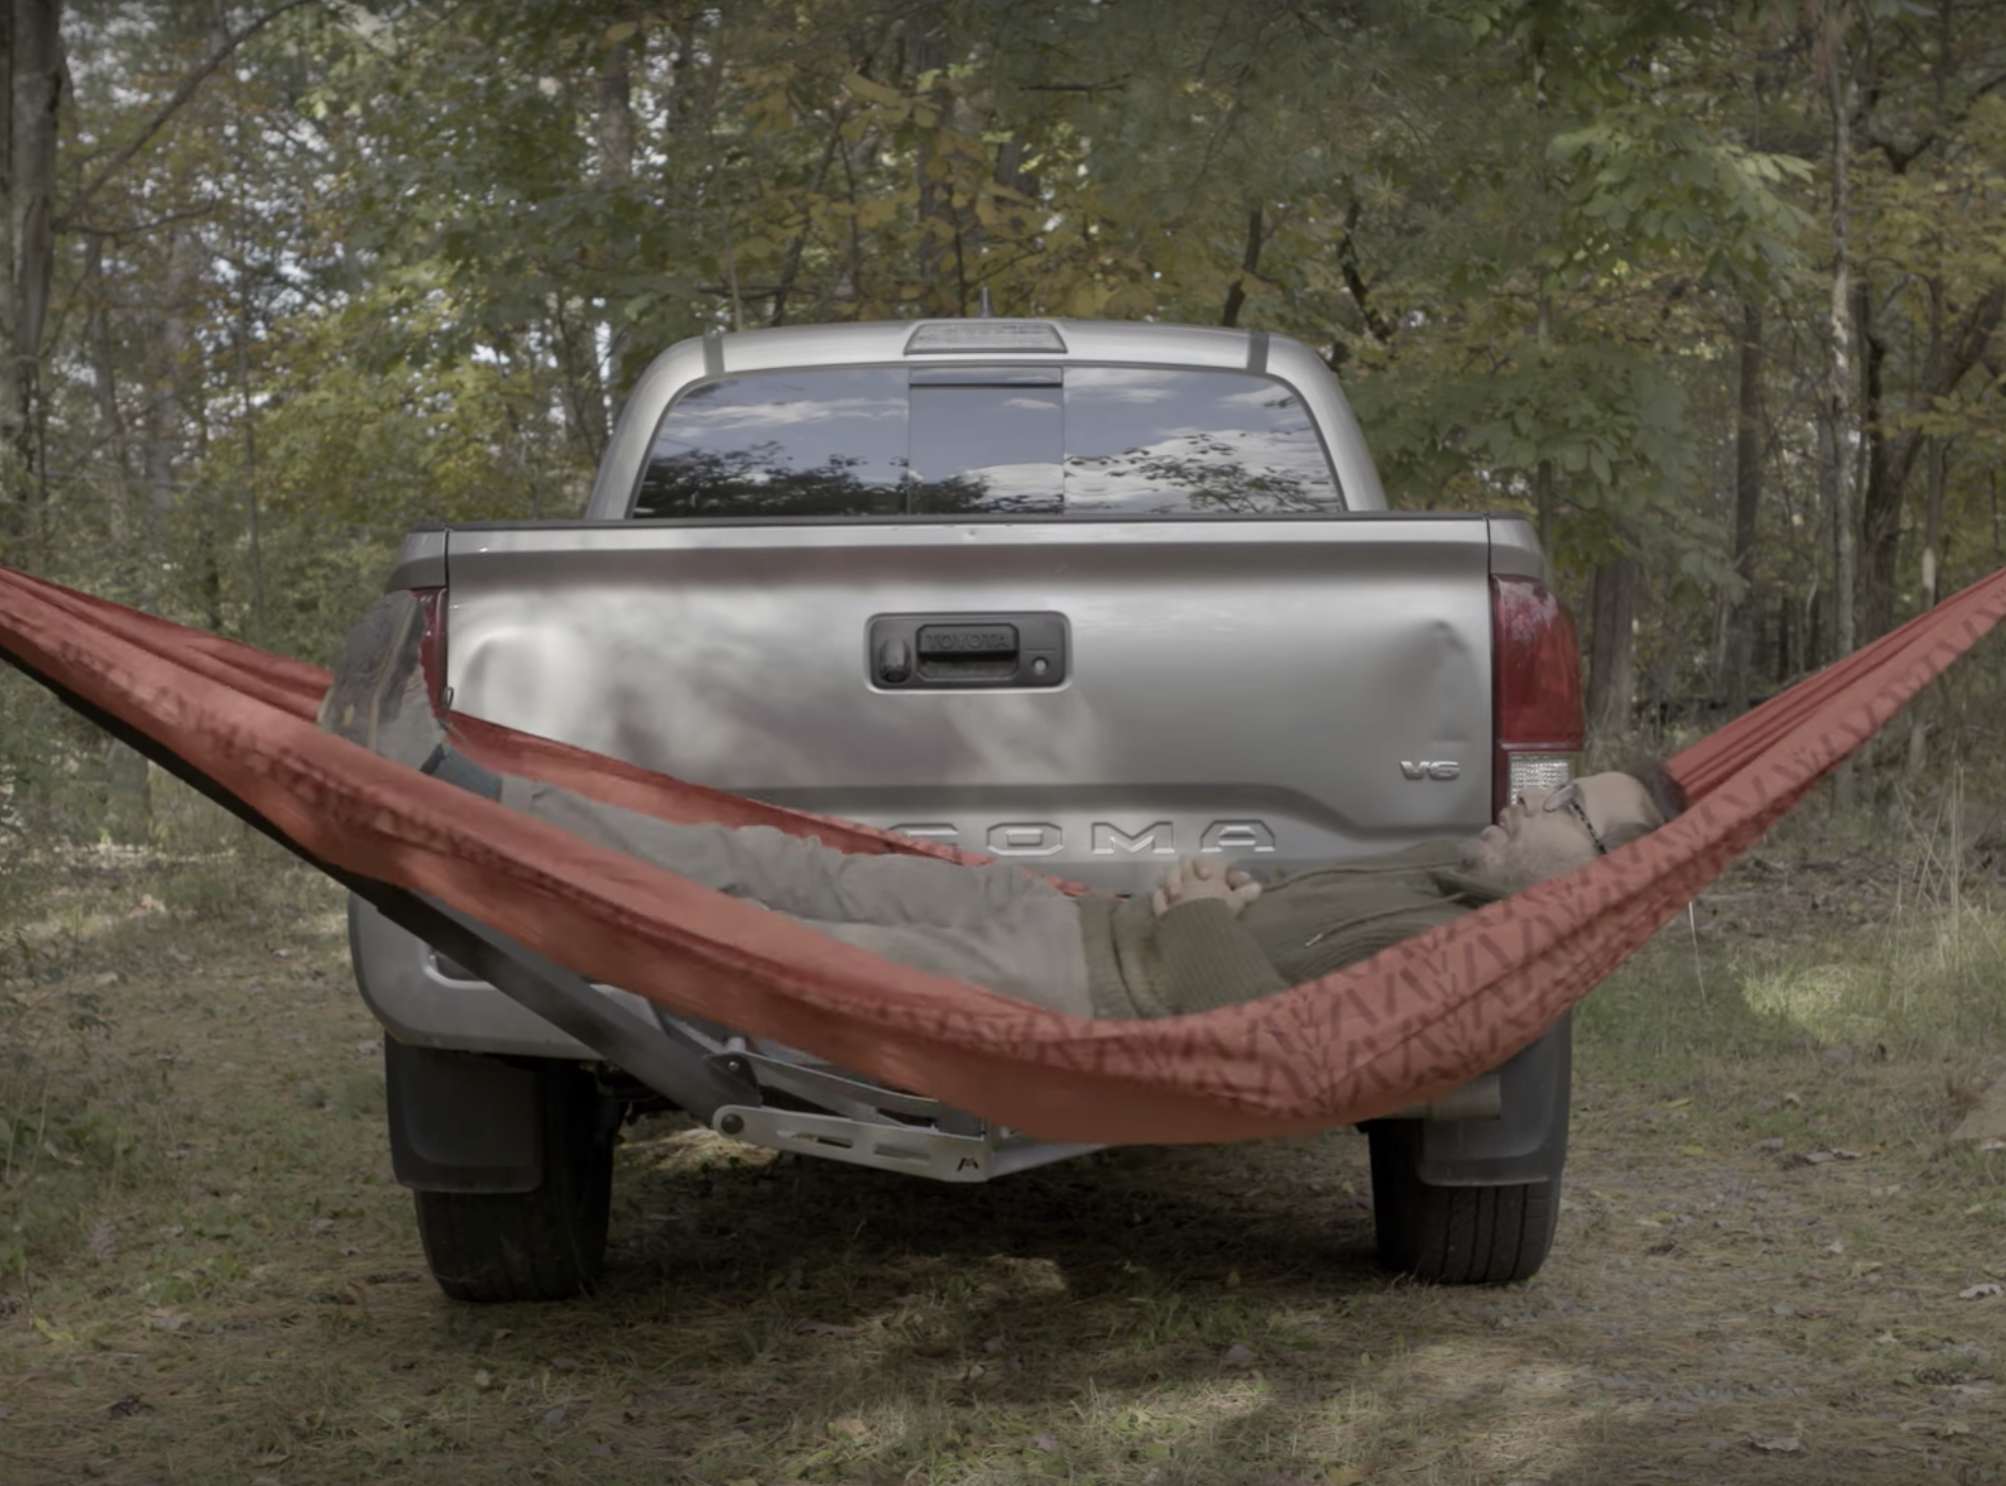 Man demonstrates building a hammock on your truck bed